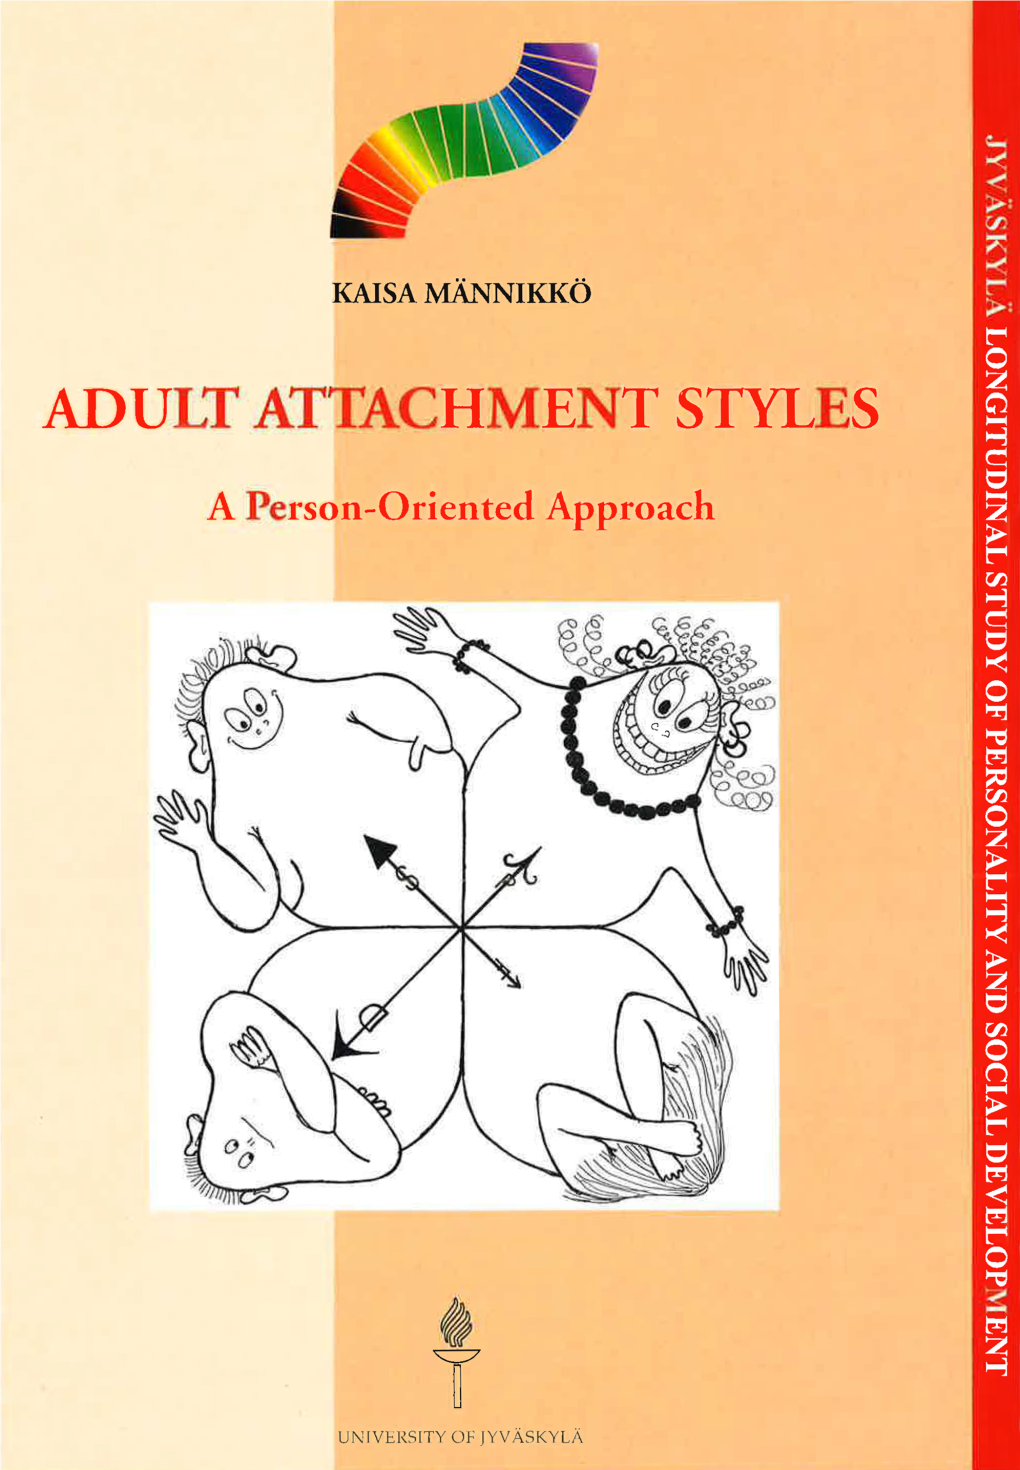 Adult Attachment Styles. a Person-Oriented Approach